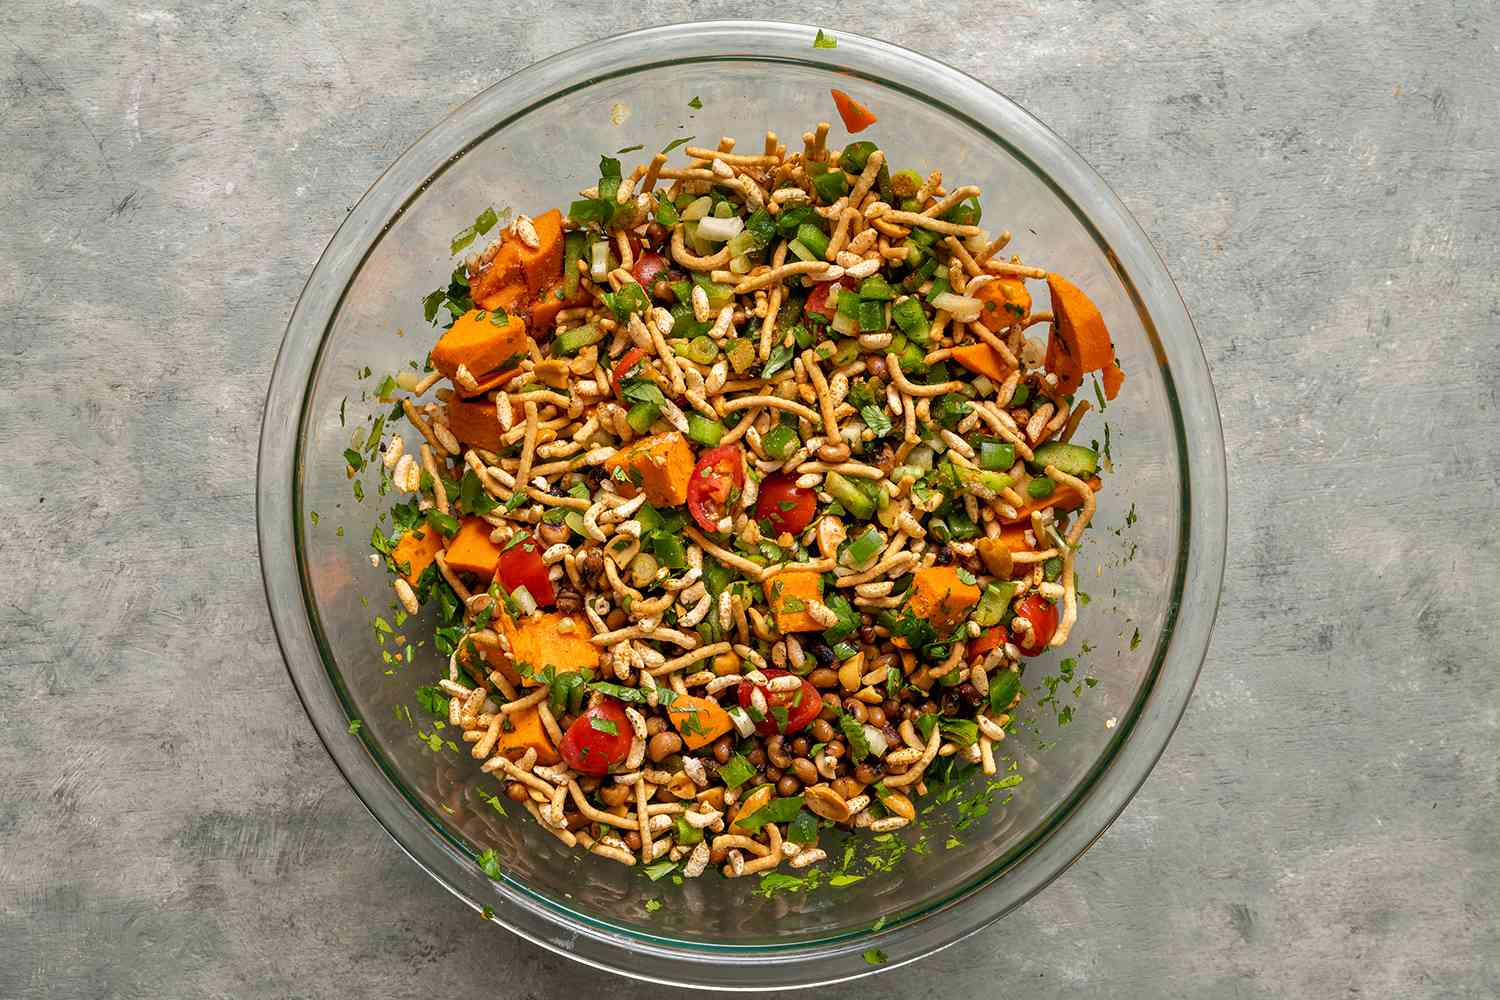 Peanuts and Peas Bhel Puri in a glass bowl 